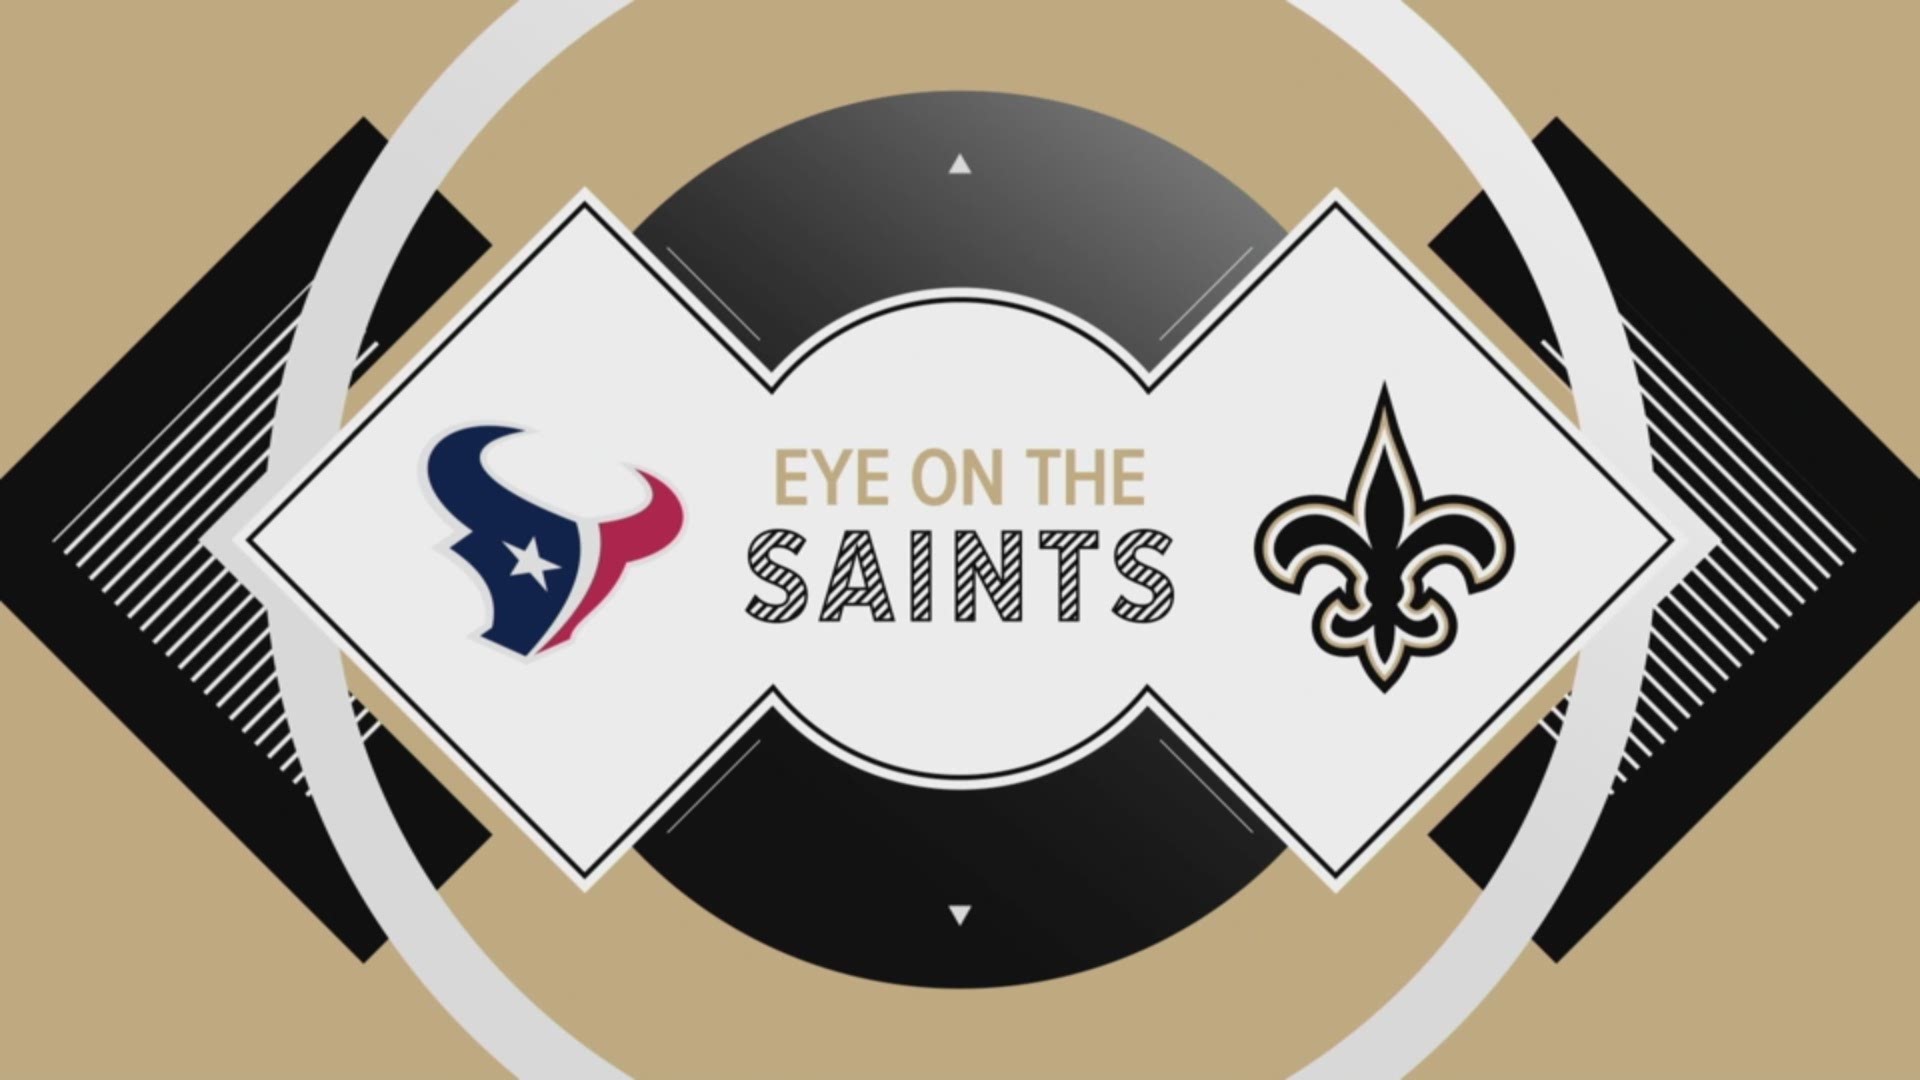 Sports Director Doug Mouton talks about what he liked most about the Saints tight win over the Texans.